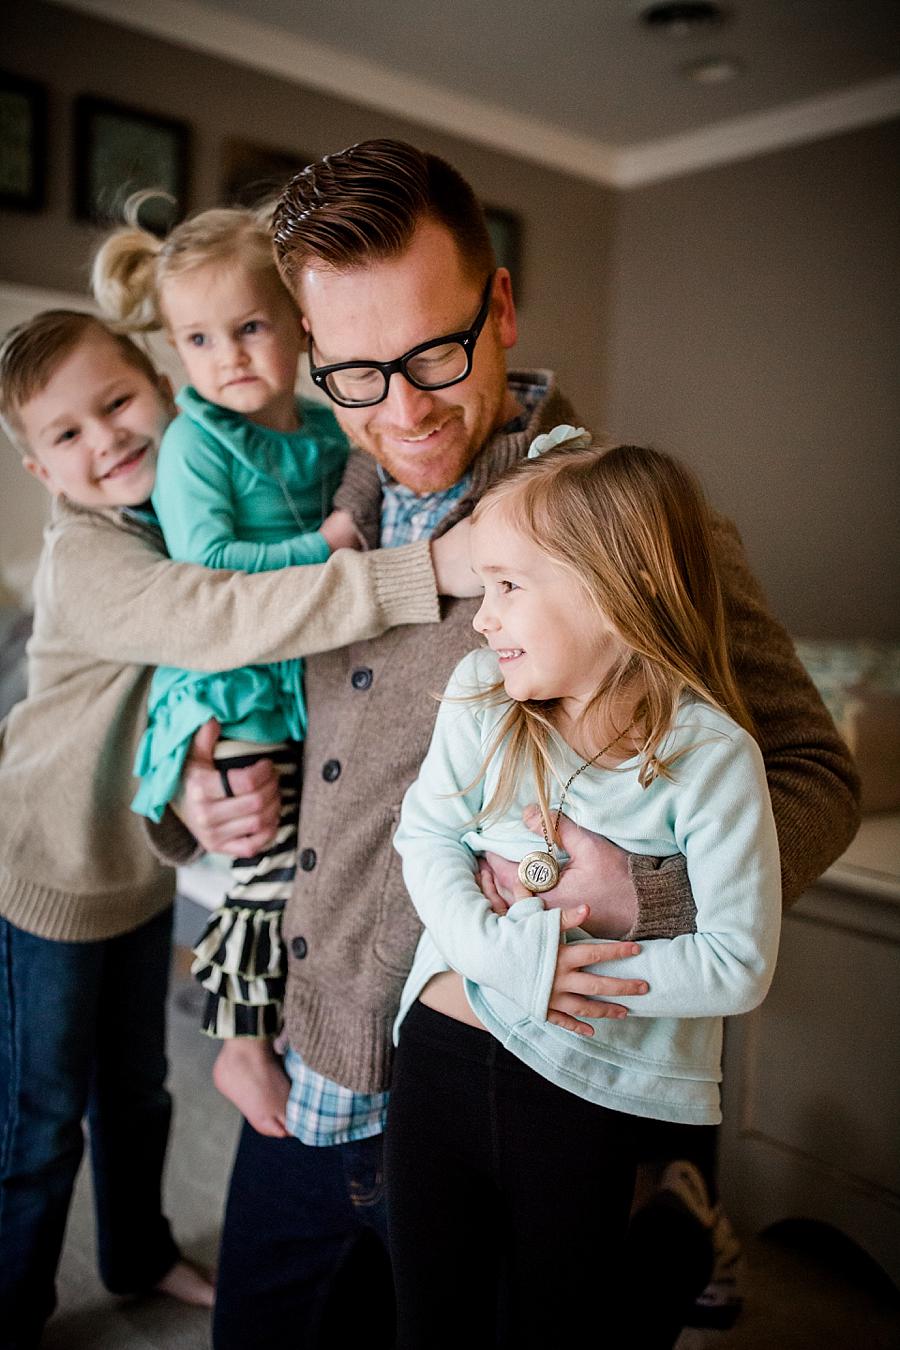 All his older kids and dad at this lifestyle family session by Knoxville Wedding Photographer, Amanda May Photos.